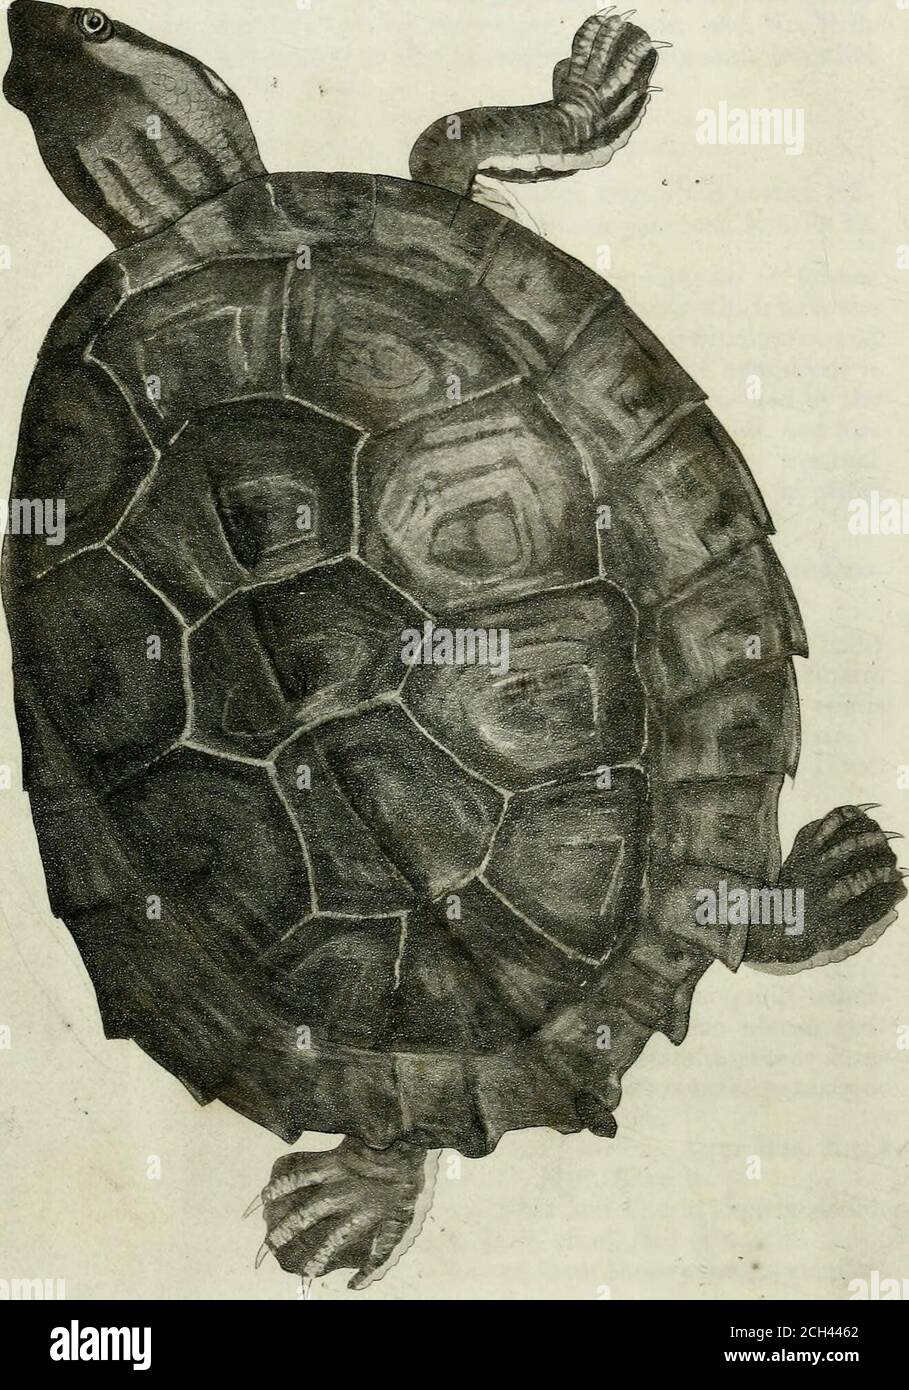 . Synopsis reptilium : or short descriptions of the species of reptiles. Part I., Cataphracta. Tortoises, crocodiles, and enaliosaurians . usca dorso obtuse carinato,margine explanato acute dentato, areolis punctatis spiniscentralibus armatis, sterno pallide fusco brunneo radiato. Eniys spinosa, Bell. Mss. (v. Mus. Nost.) Gray, lUust.Ind. Zool. ii. t. f. 1. Habit, apud Penang. Capt. Hay, A large species only known from two specimens in a veryyoung state, 4|- inches long and broad. The back is fur-nished with a broad flattened central keel, and the margin isdeeply dentated and serrated all roun Stock Photo